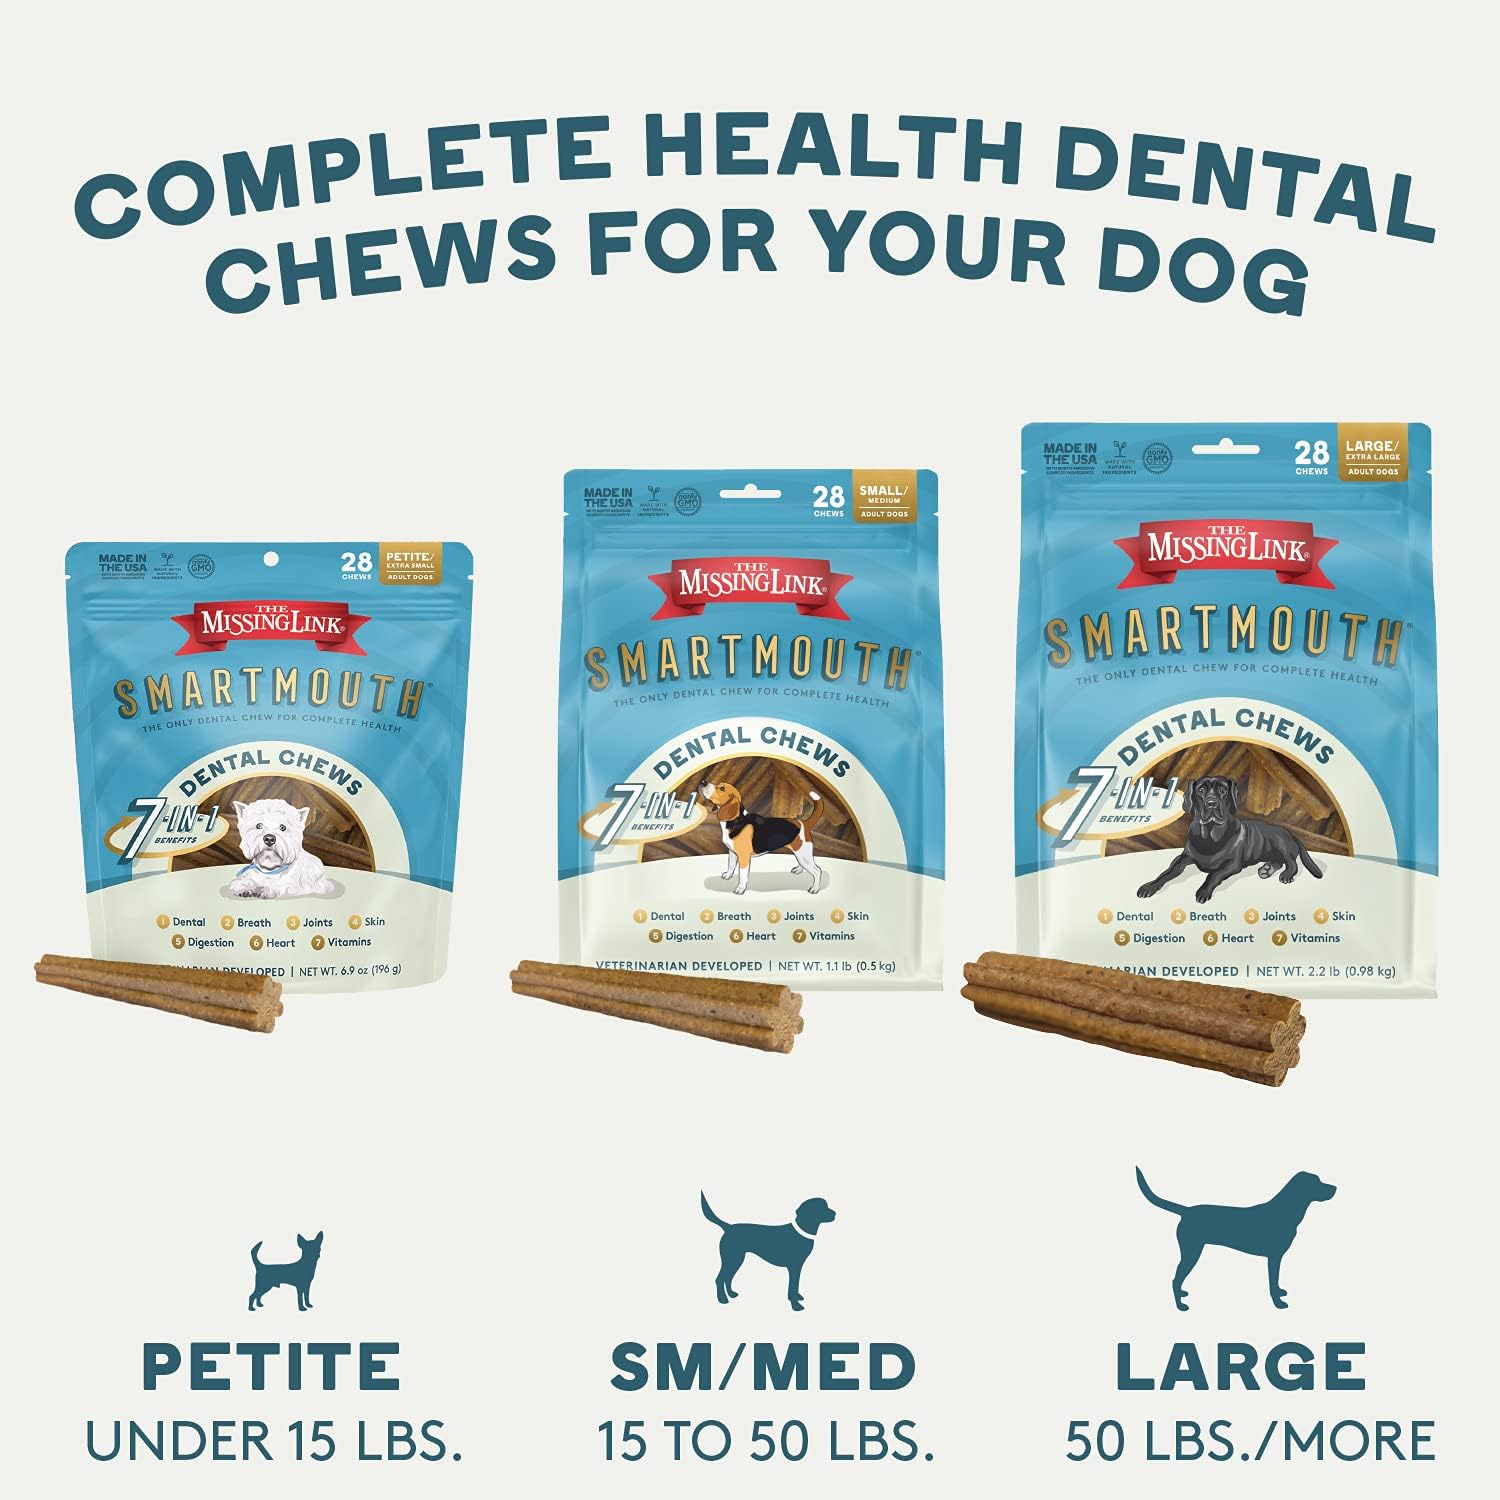 The Missing Link Smartmouth Vet Developed Dental Chew Treats, 7-in-1 Benefits: Healthy Teeth & Gums, Breath, Skin, Joints, Digestion, Heart, Immune System – Petite/XS 5-15lb Dogs, 28 Ct : Pet Supplies